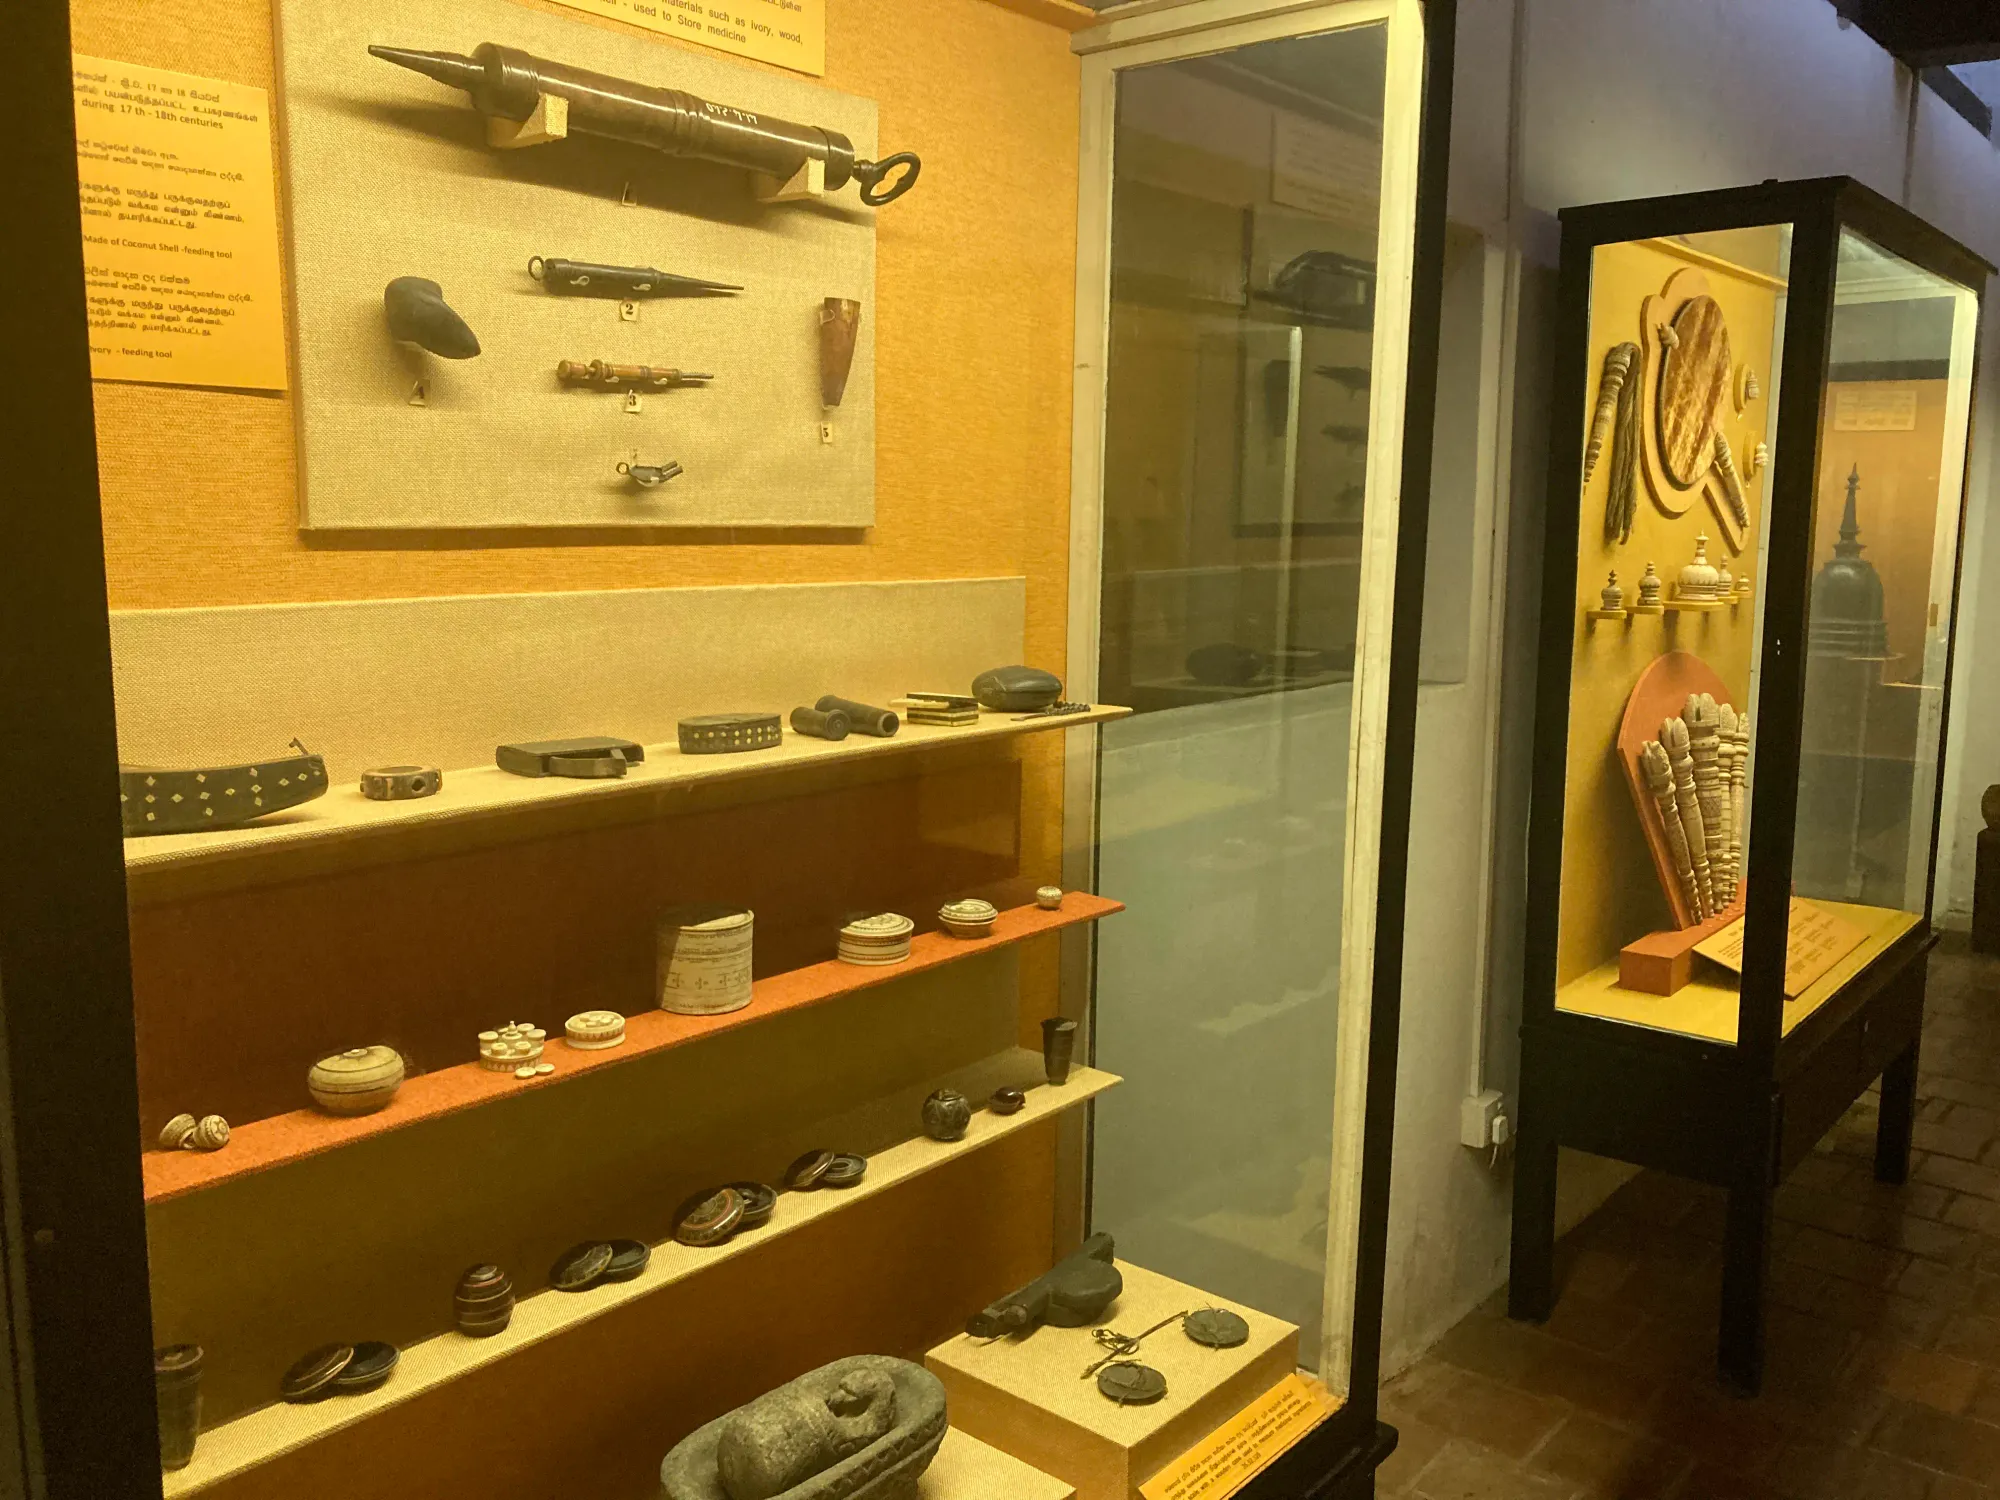 Ivory, wood and stone artifacts displayed at the Kandy National Museum, Sri Lanka